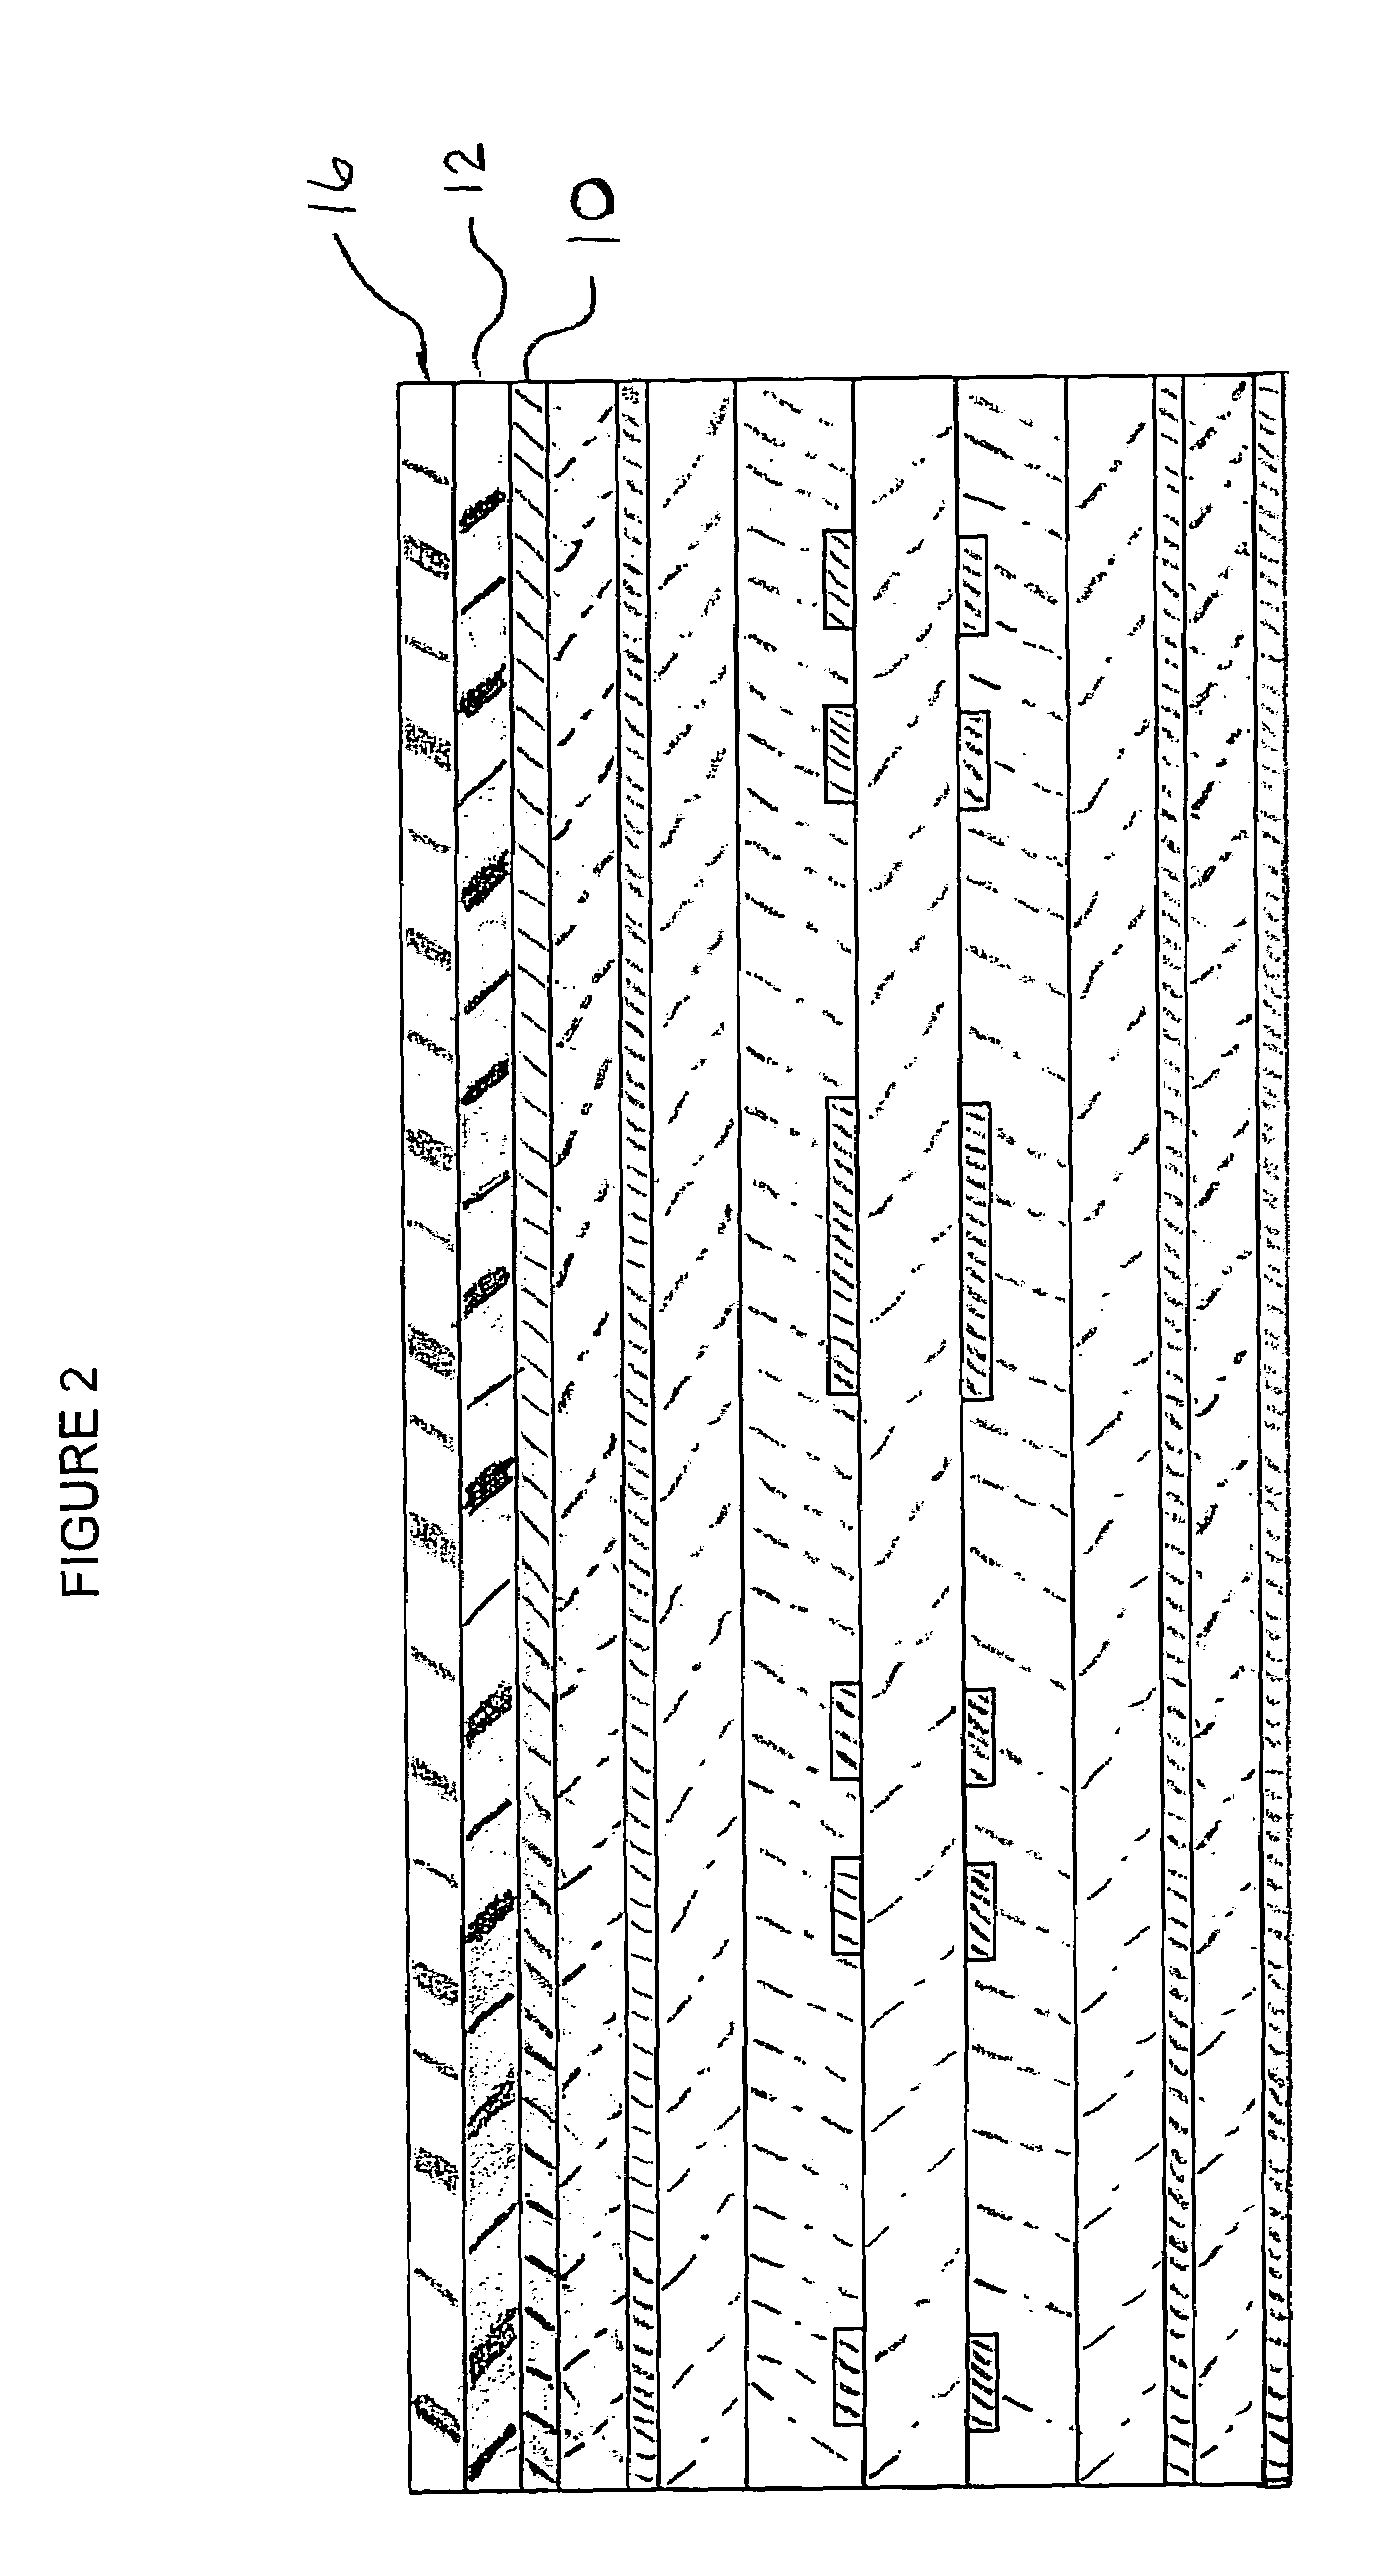 System and method for integrating optical layers in a PCB for inter-board communications